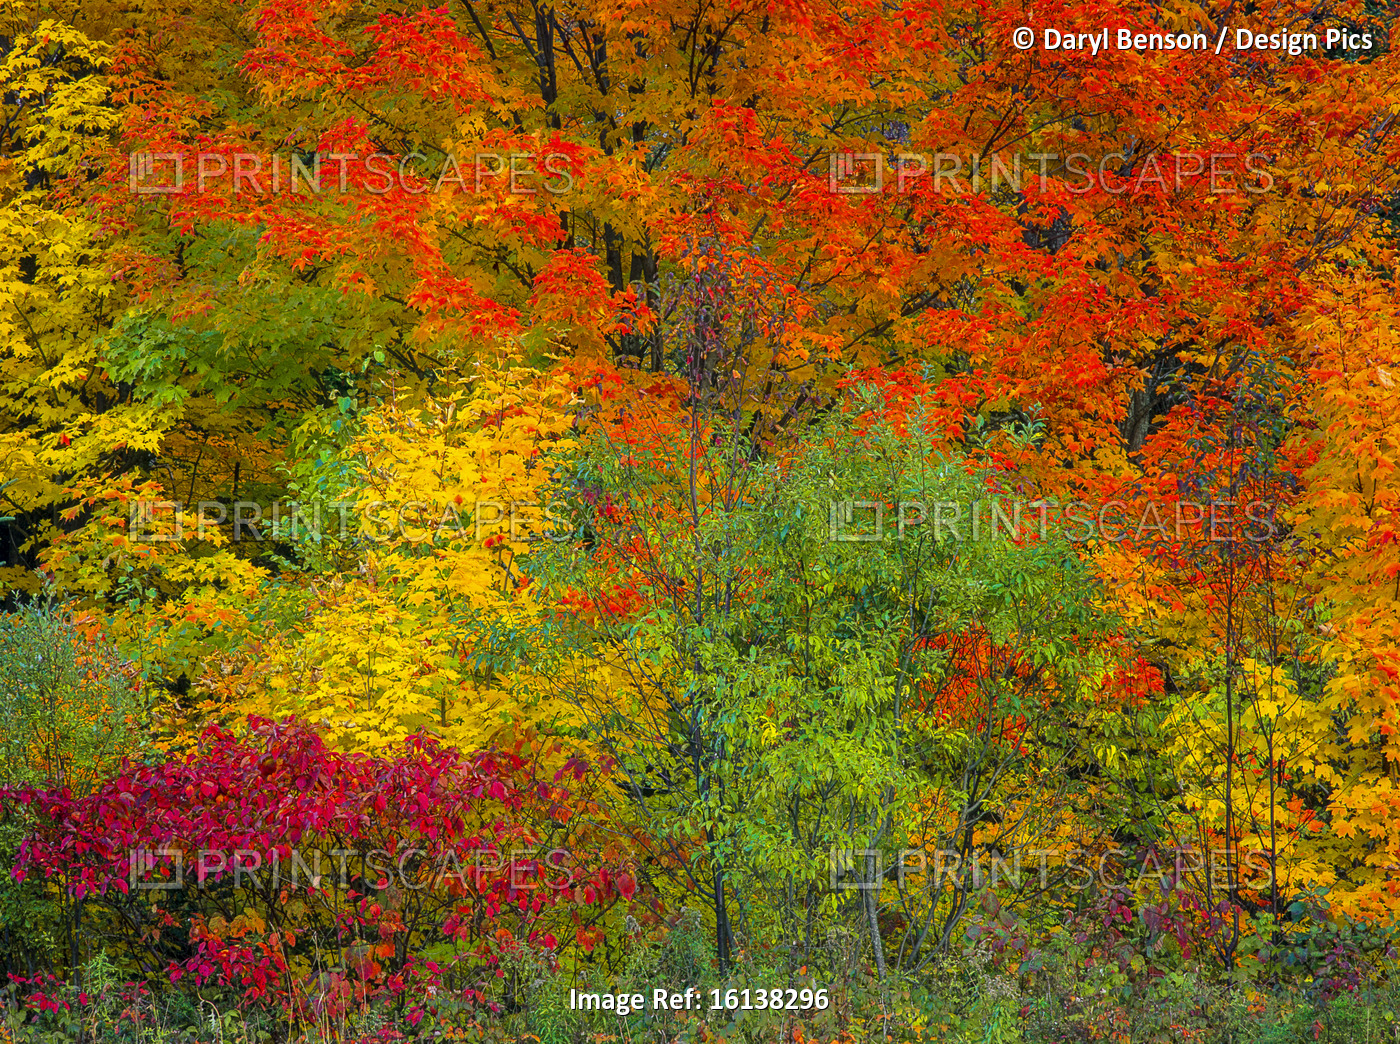 Overview of Trees in Autumn, North Shore, Gaspe Peninsula, Quebec, Canada